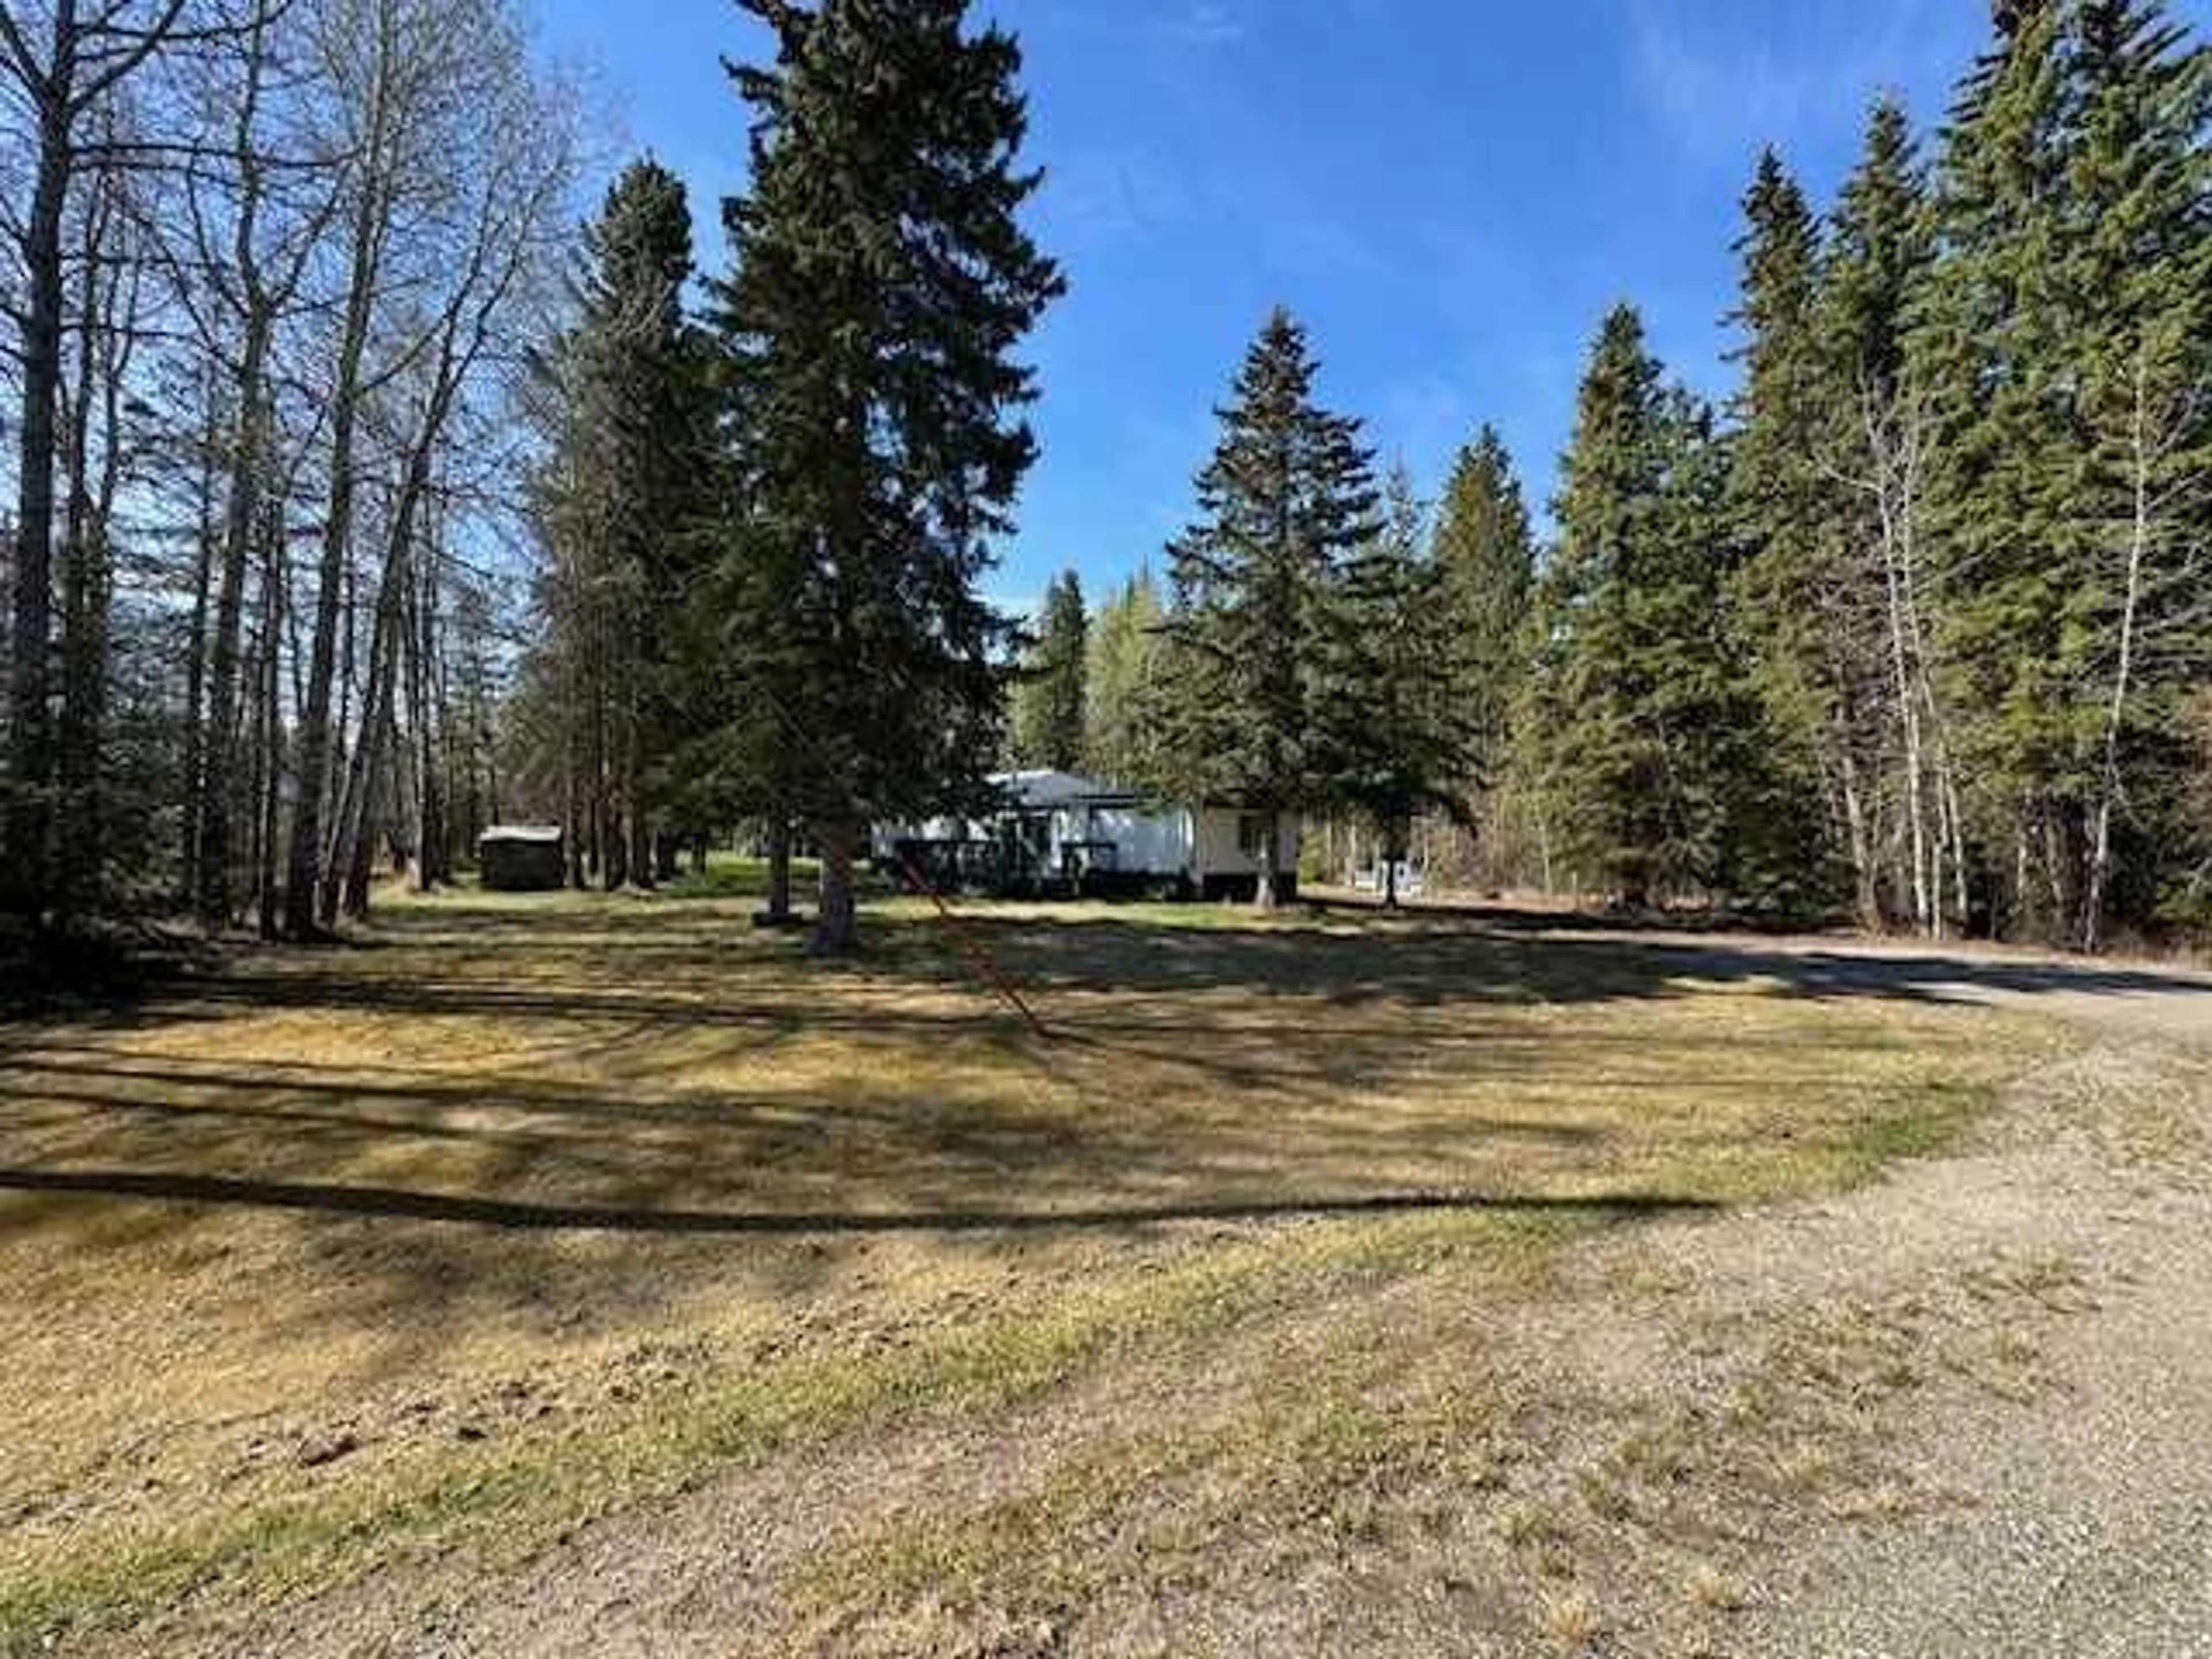 Outside view for 5009 55 Ave, Niton Junction Alberta T7E 5A1